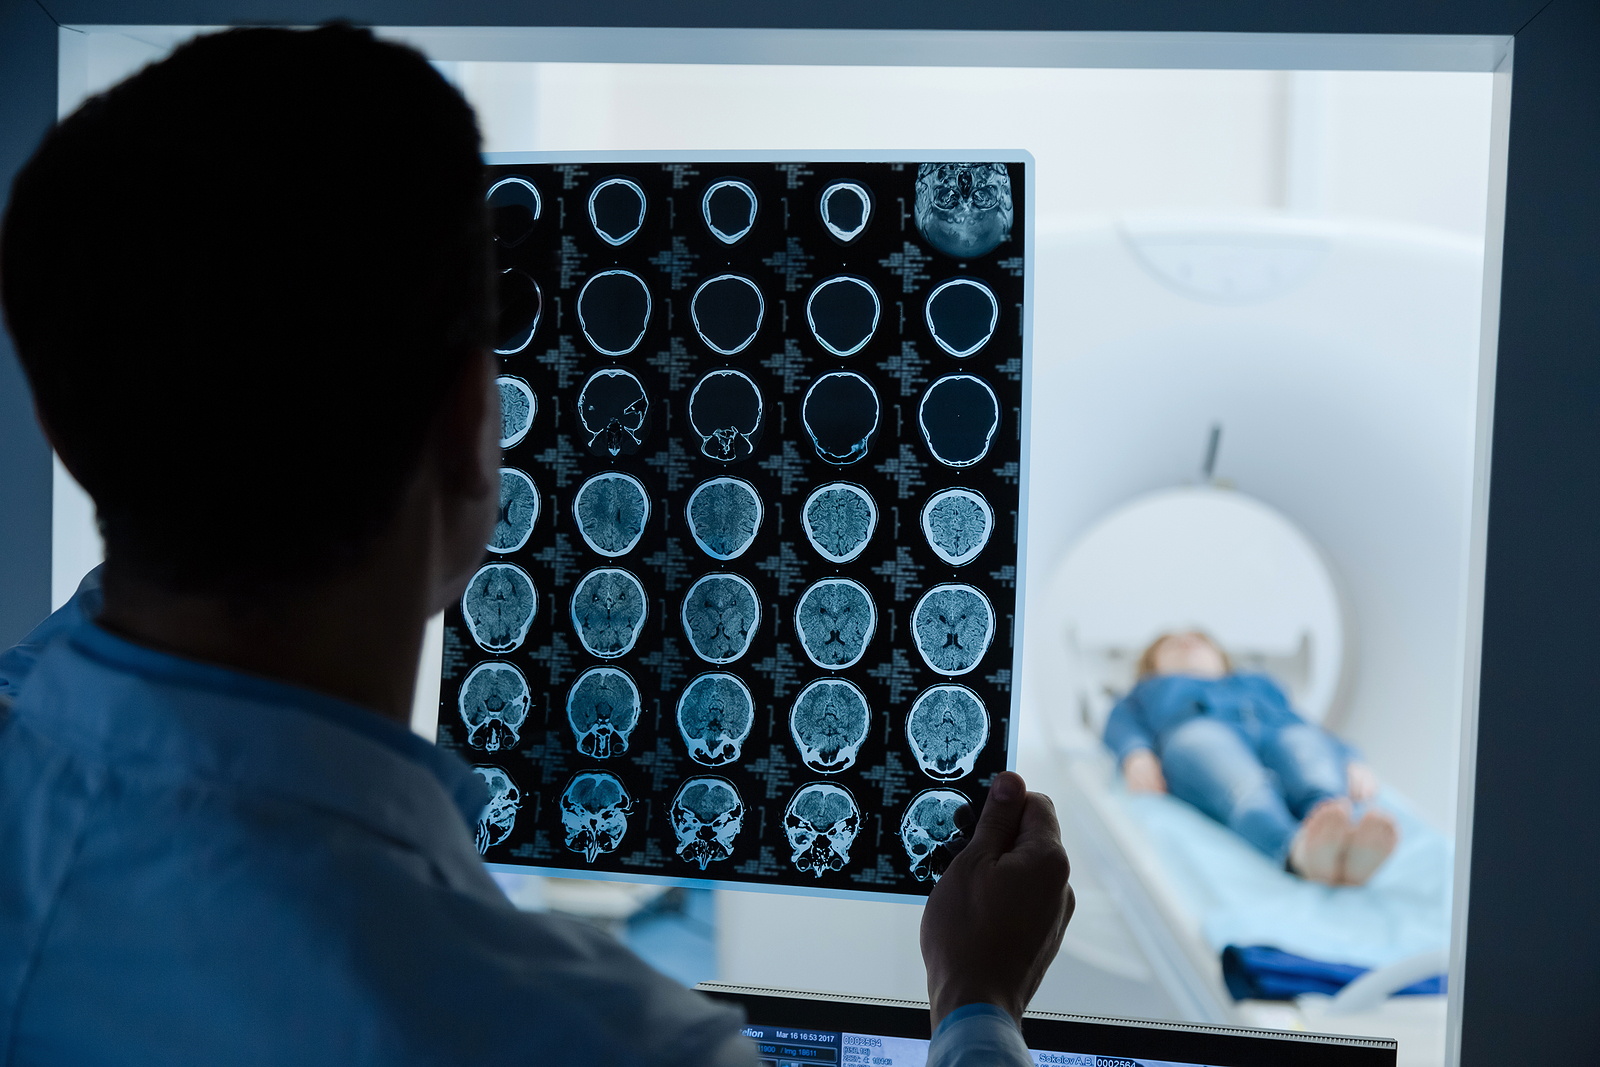 doctor holding a MRI scan images - doctor holding a MRI scan images